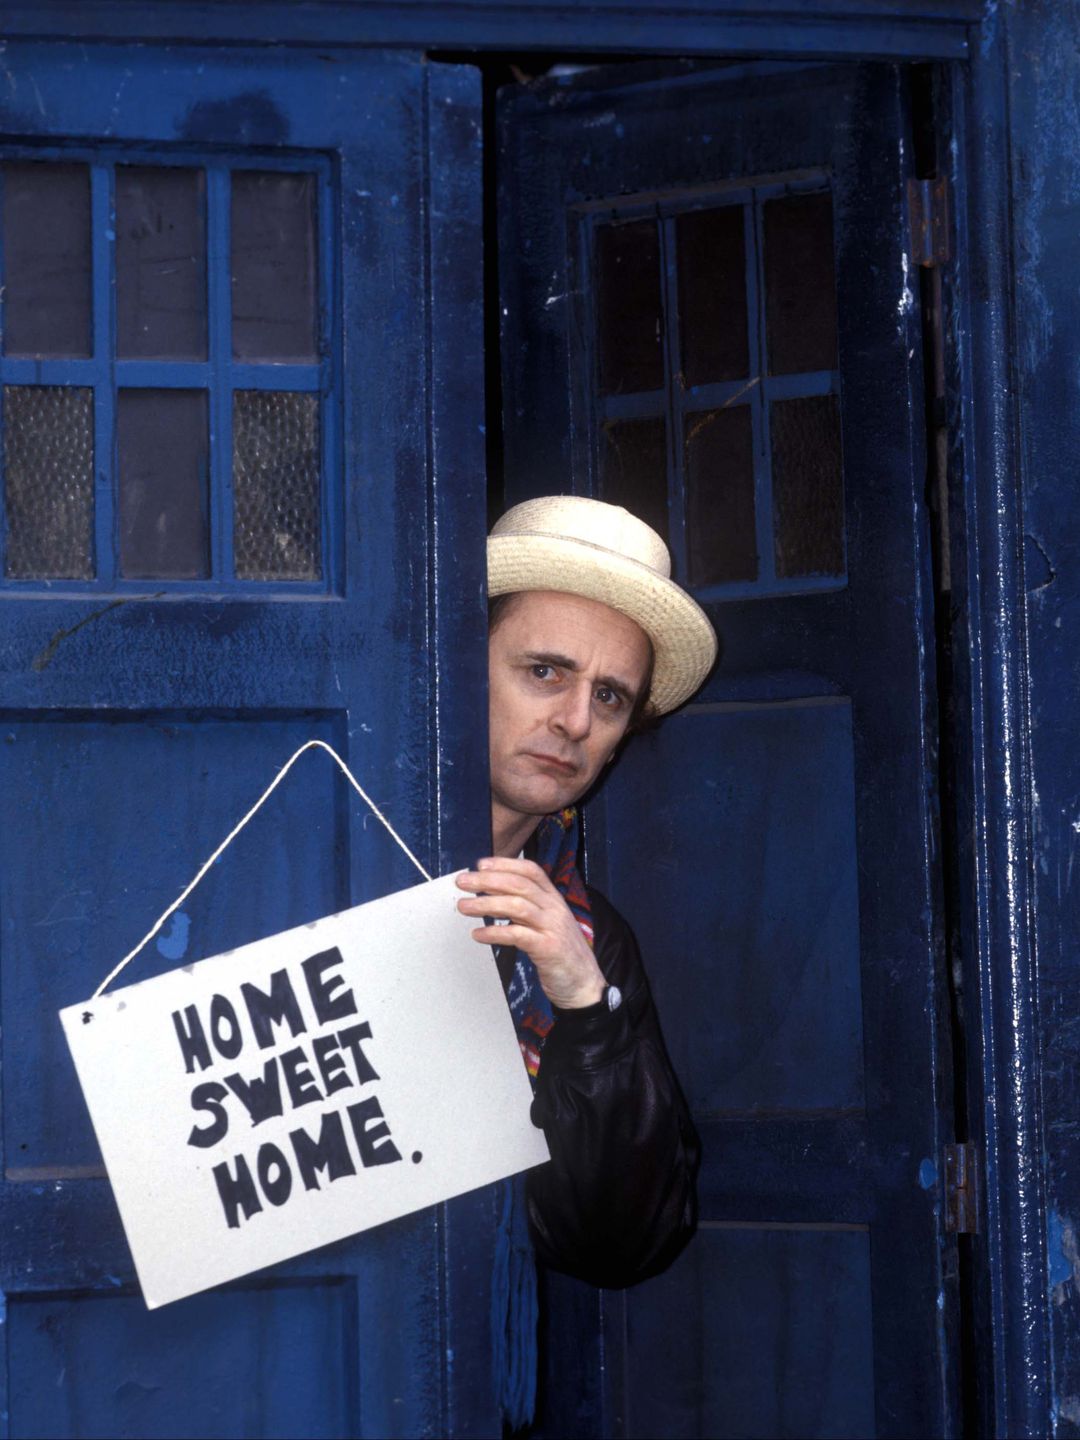 Sylvester McCoy in character as The Doctor inside a blue police box